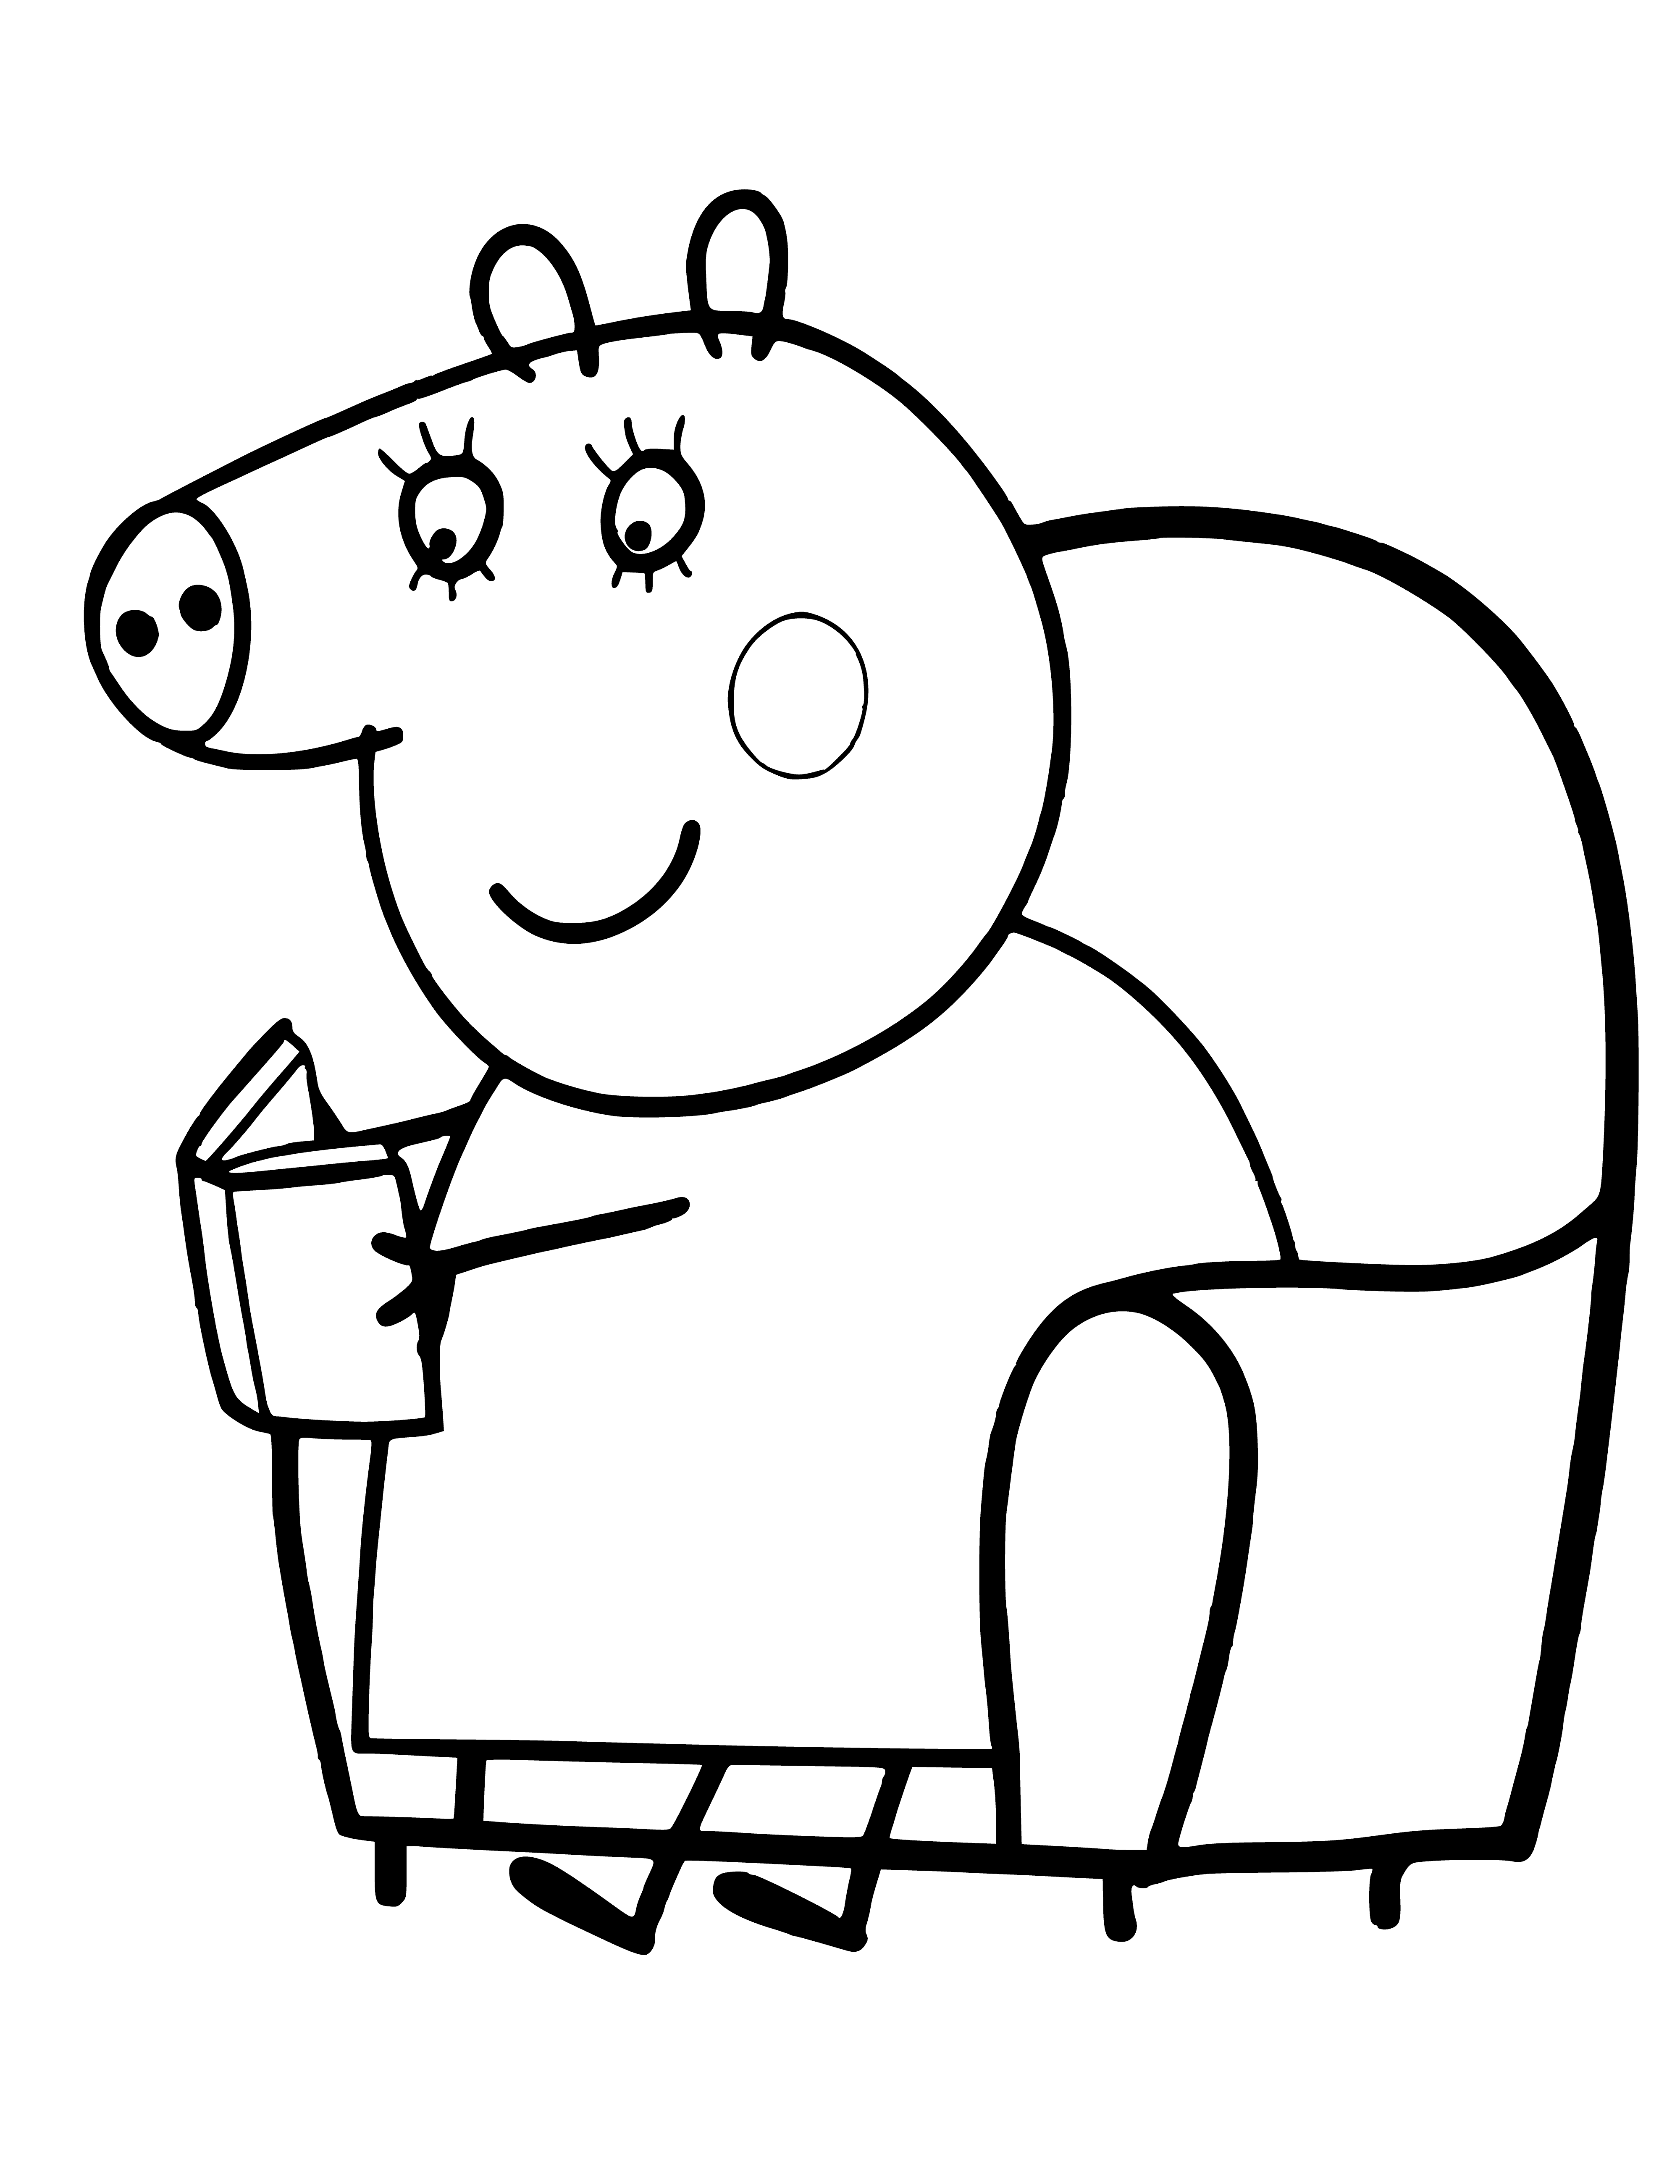 coloring page: Pink pig in a chair, wearing a crown & surrounded by a teacup, footstool and table—ready to sip some tea & enjoy her royal life!